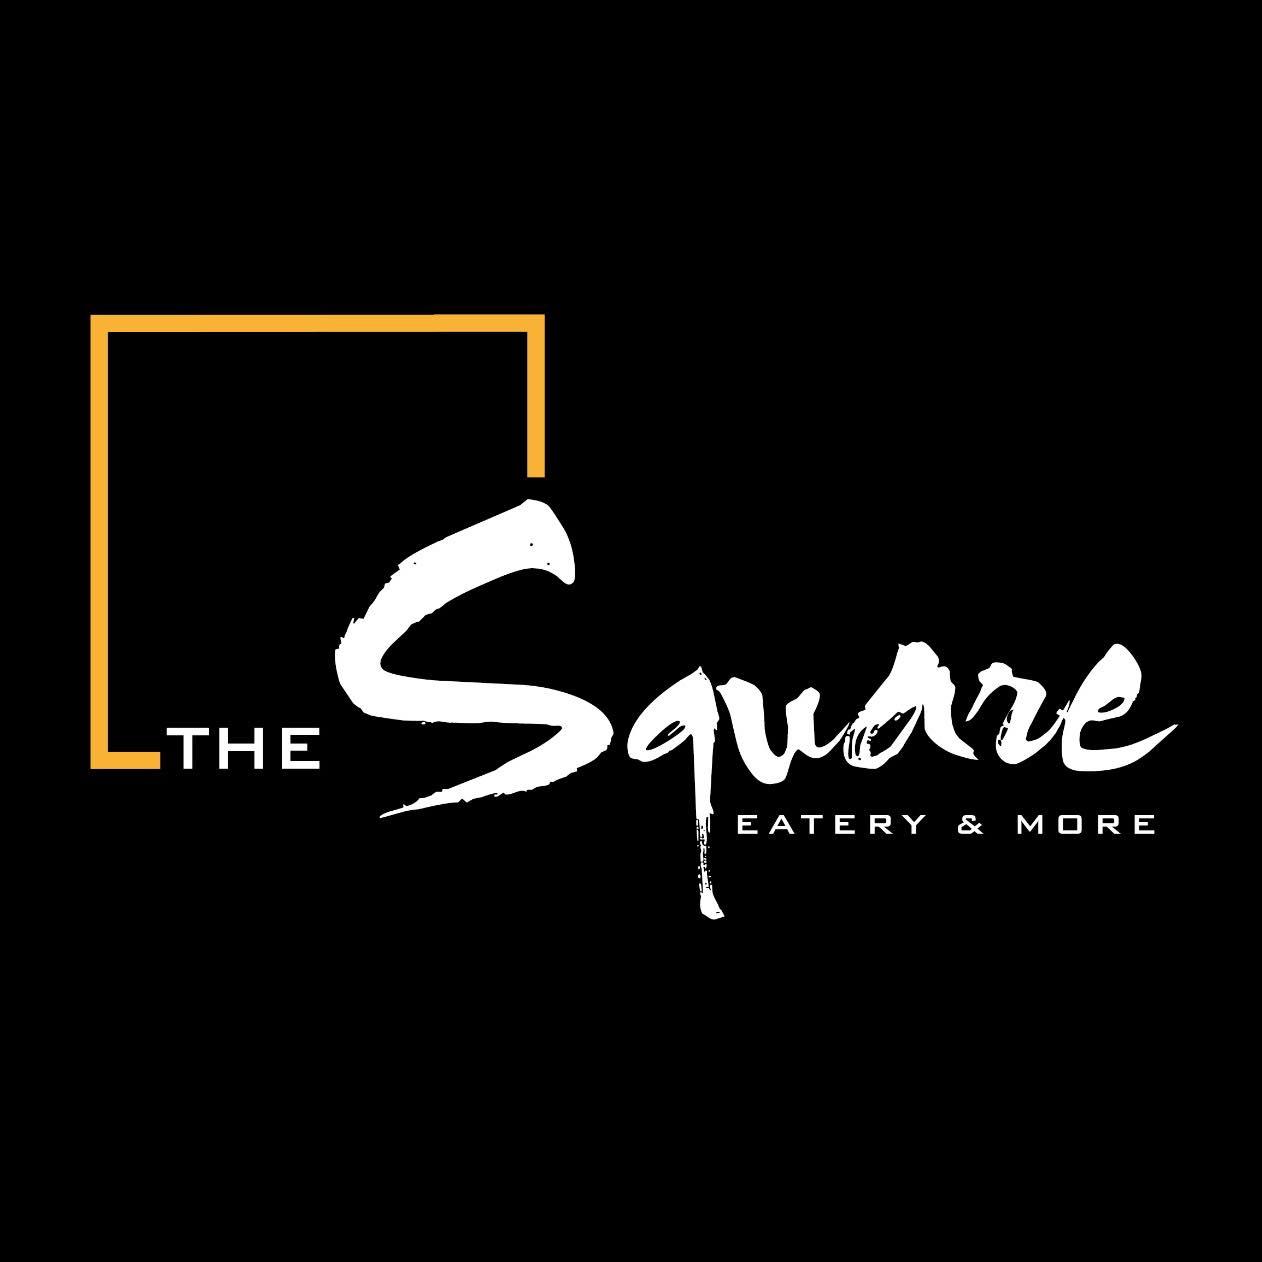 THE SQUARE Eatery & More